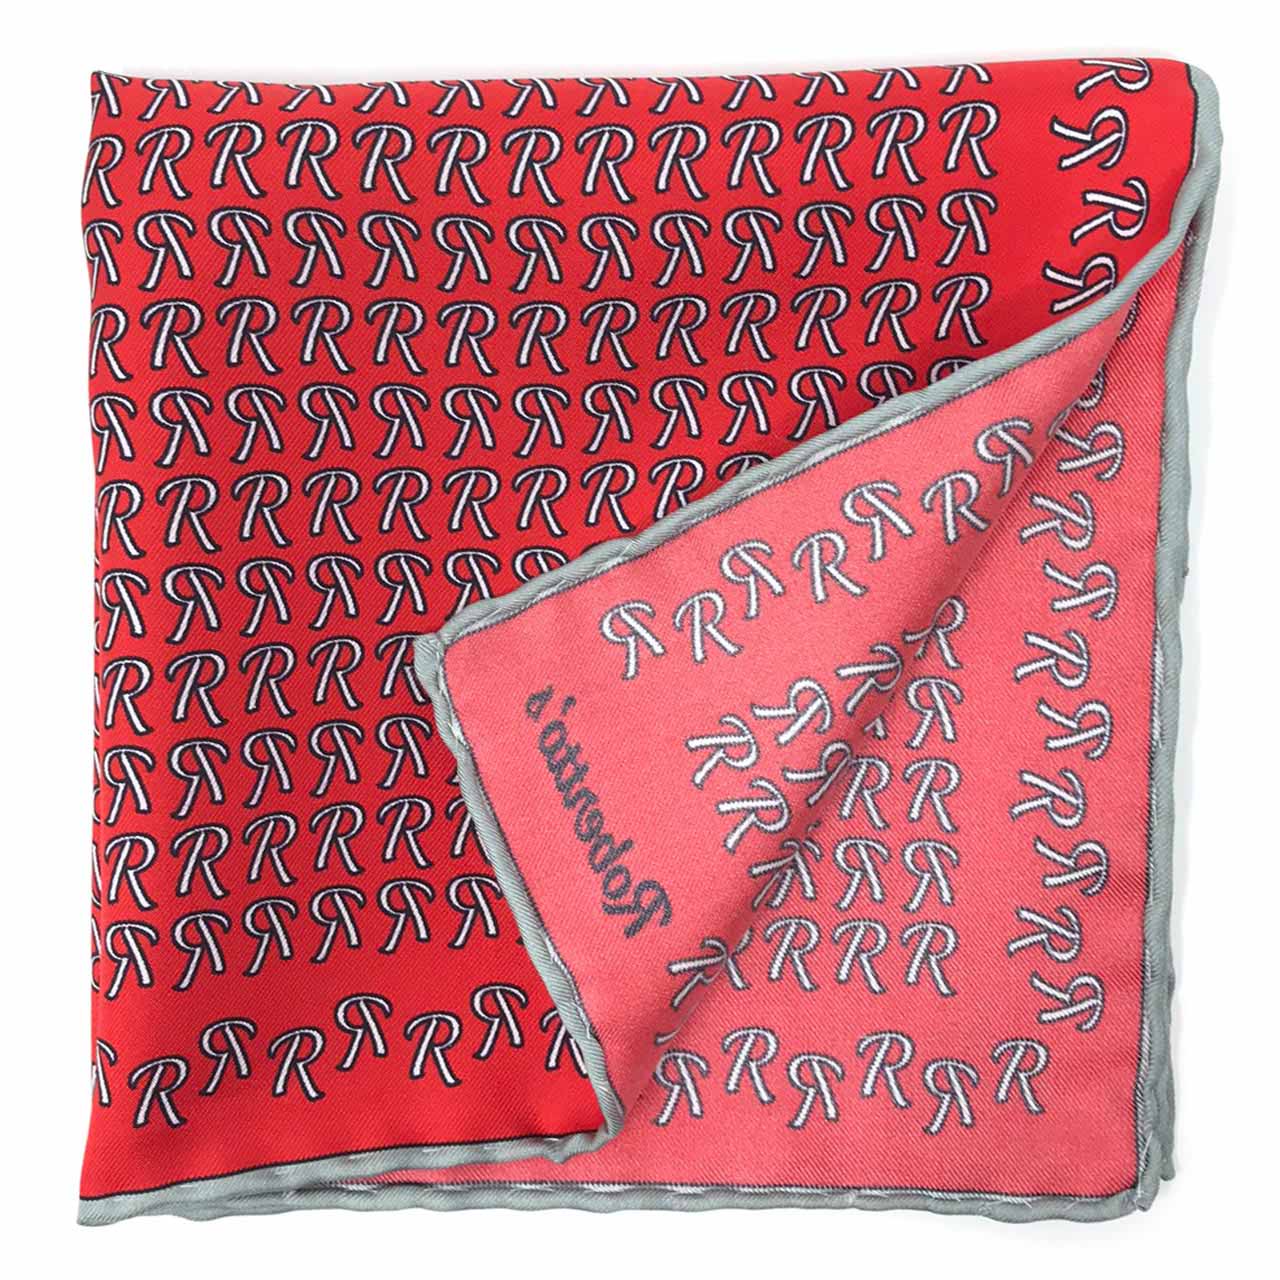 The Monogram Edition Awesome Red Pocket Square